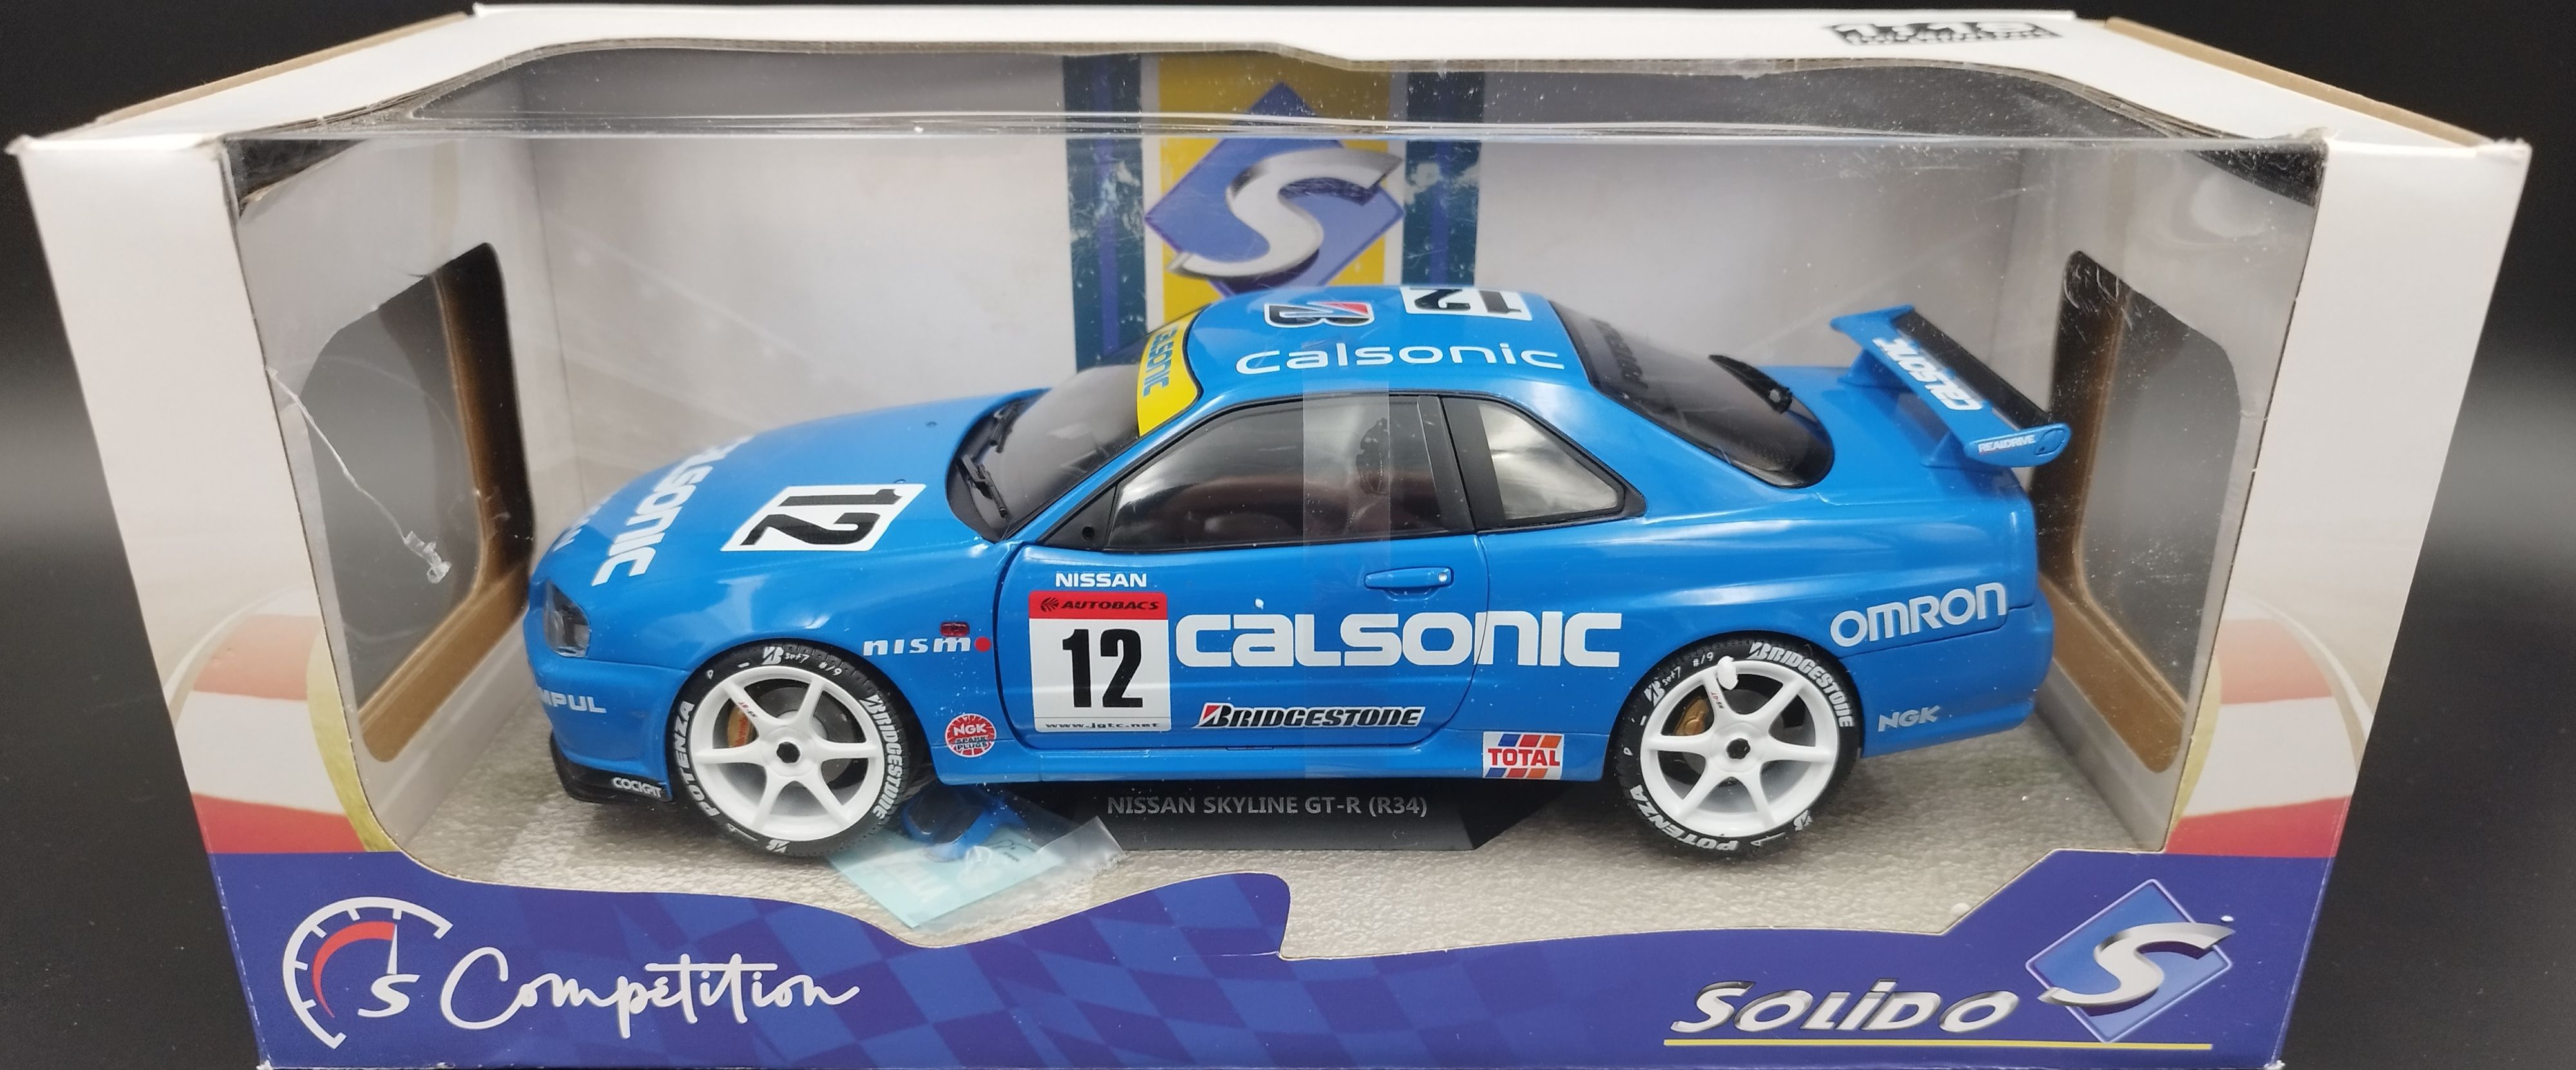 1:18 Solido 2000 Nissan Skyline GT-R  R34 Streetfighter Calsonic model